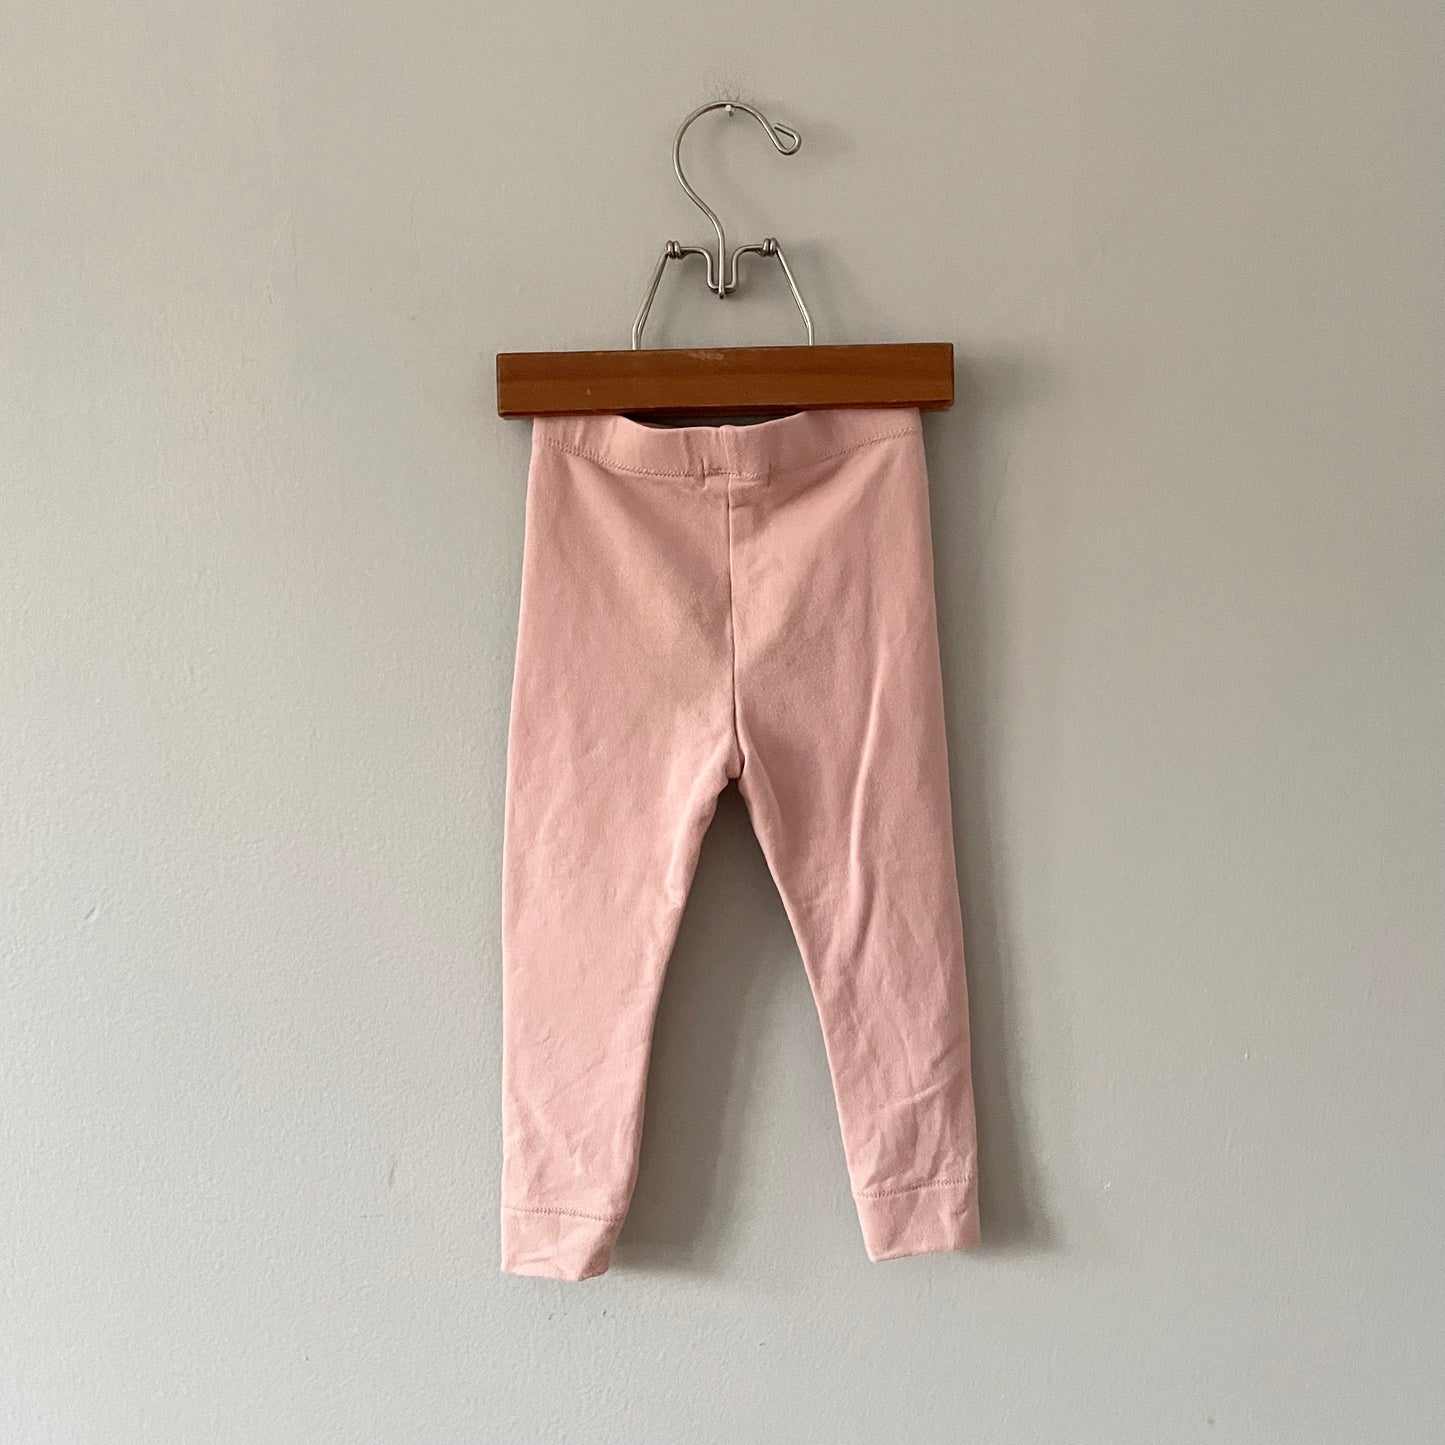 Buy miles the label Kids Snow Pant Woven Pink at